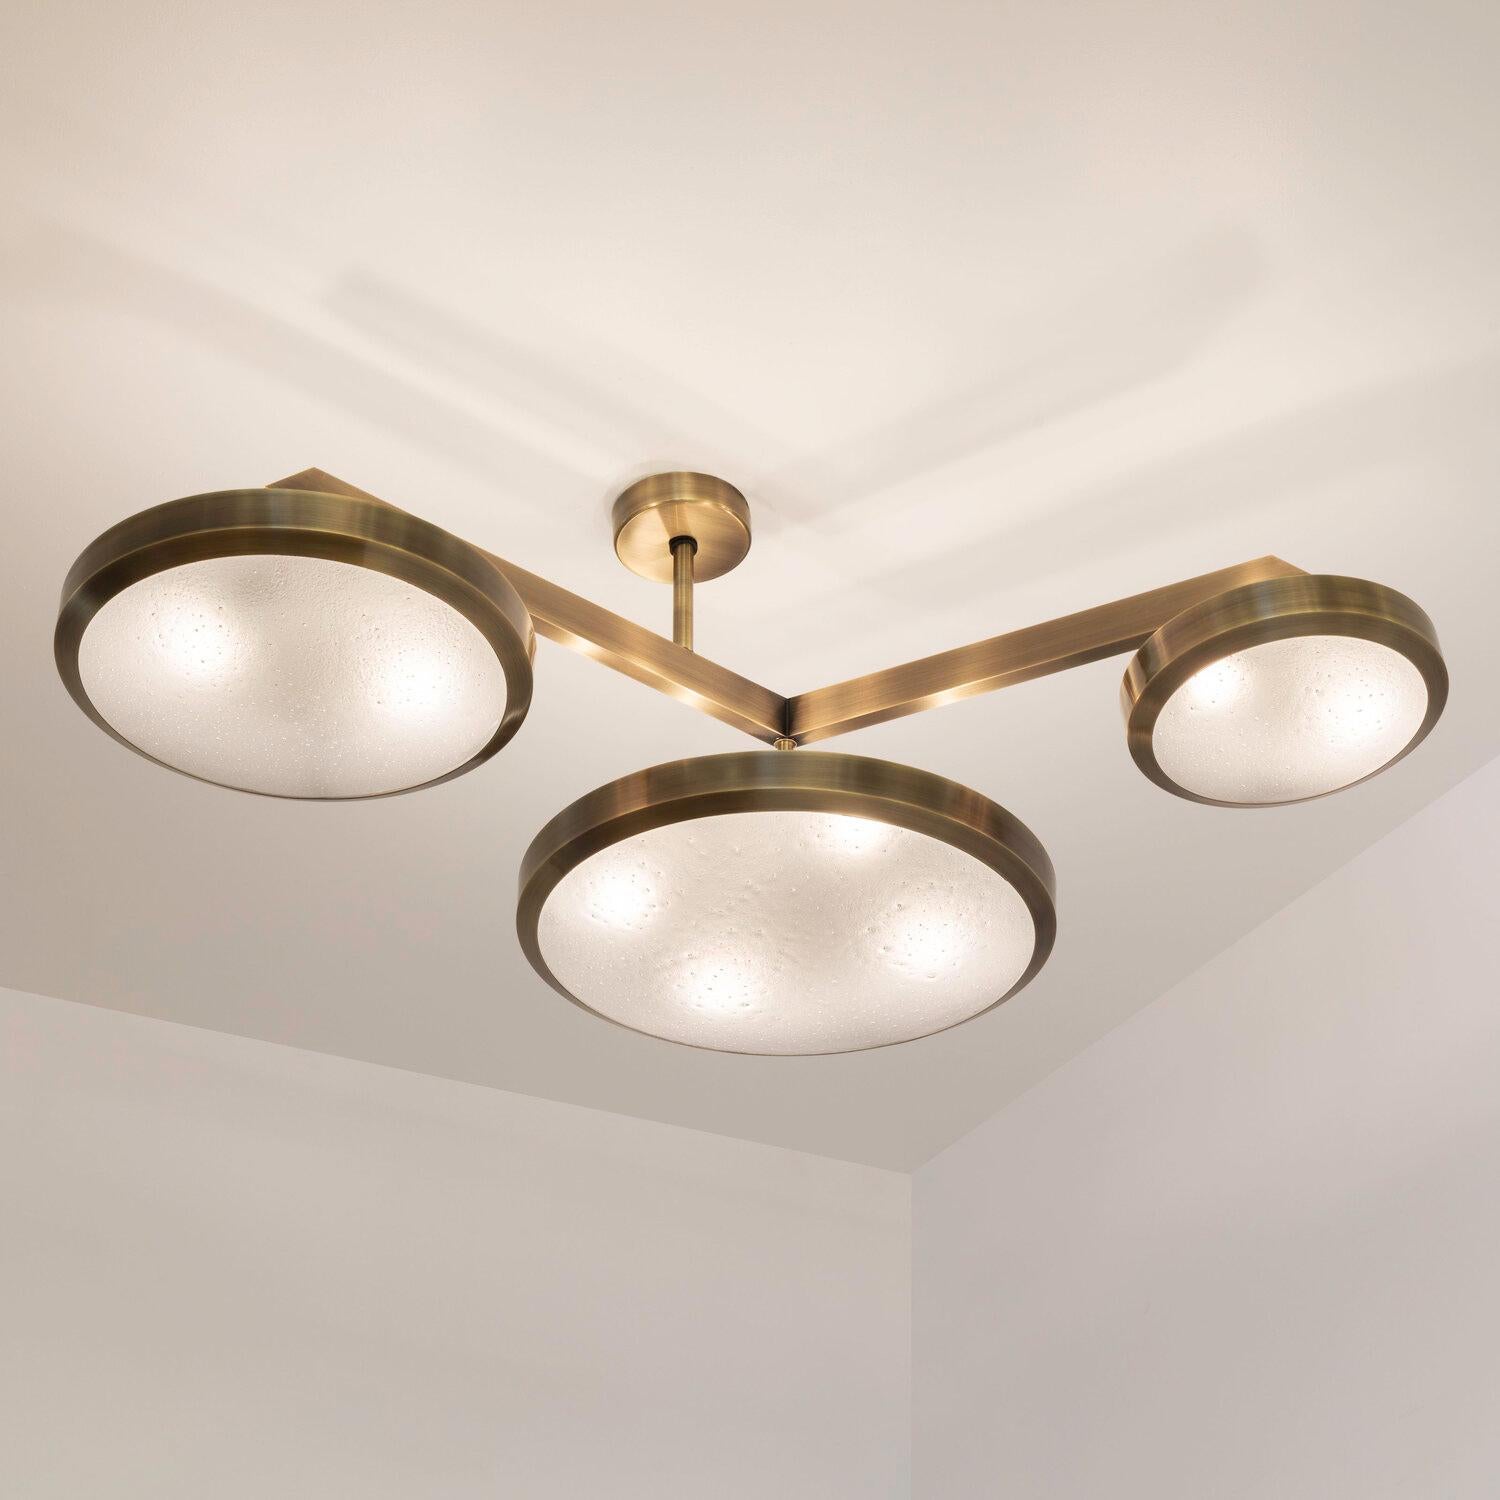 Zeta Ceiling Light by Gaspare Asaro-Polished Brass Finish In New Condition For Sale In New York, NY